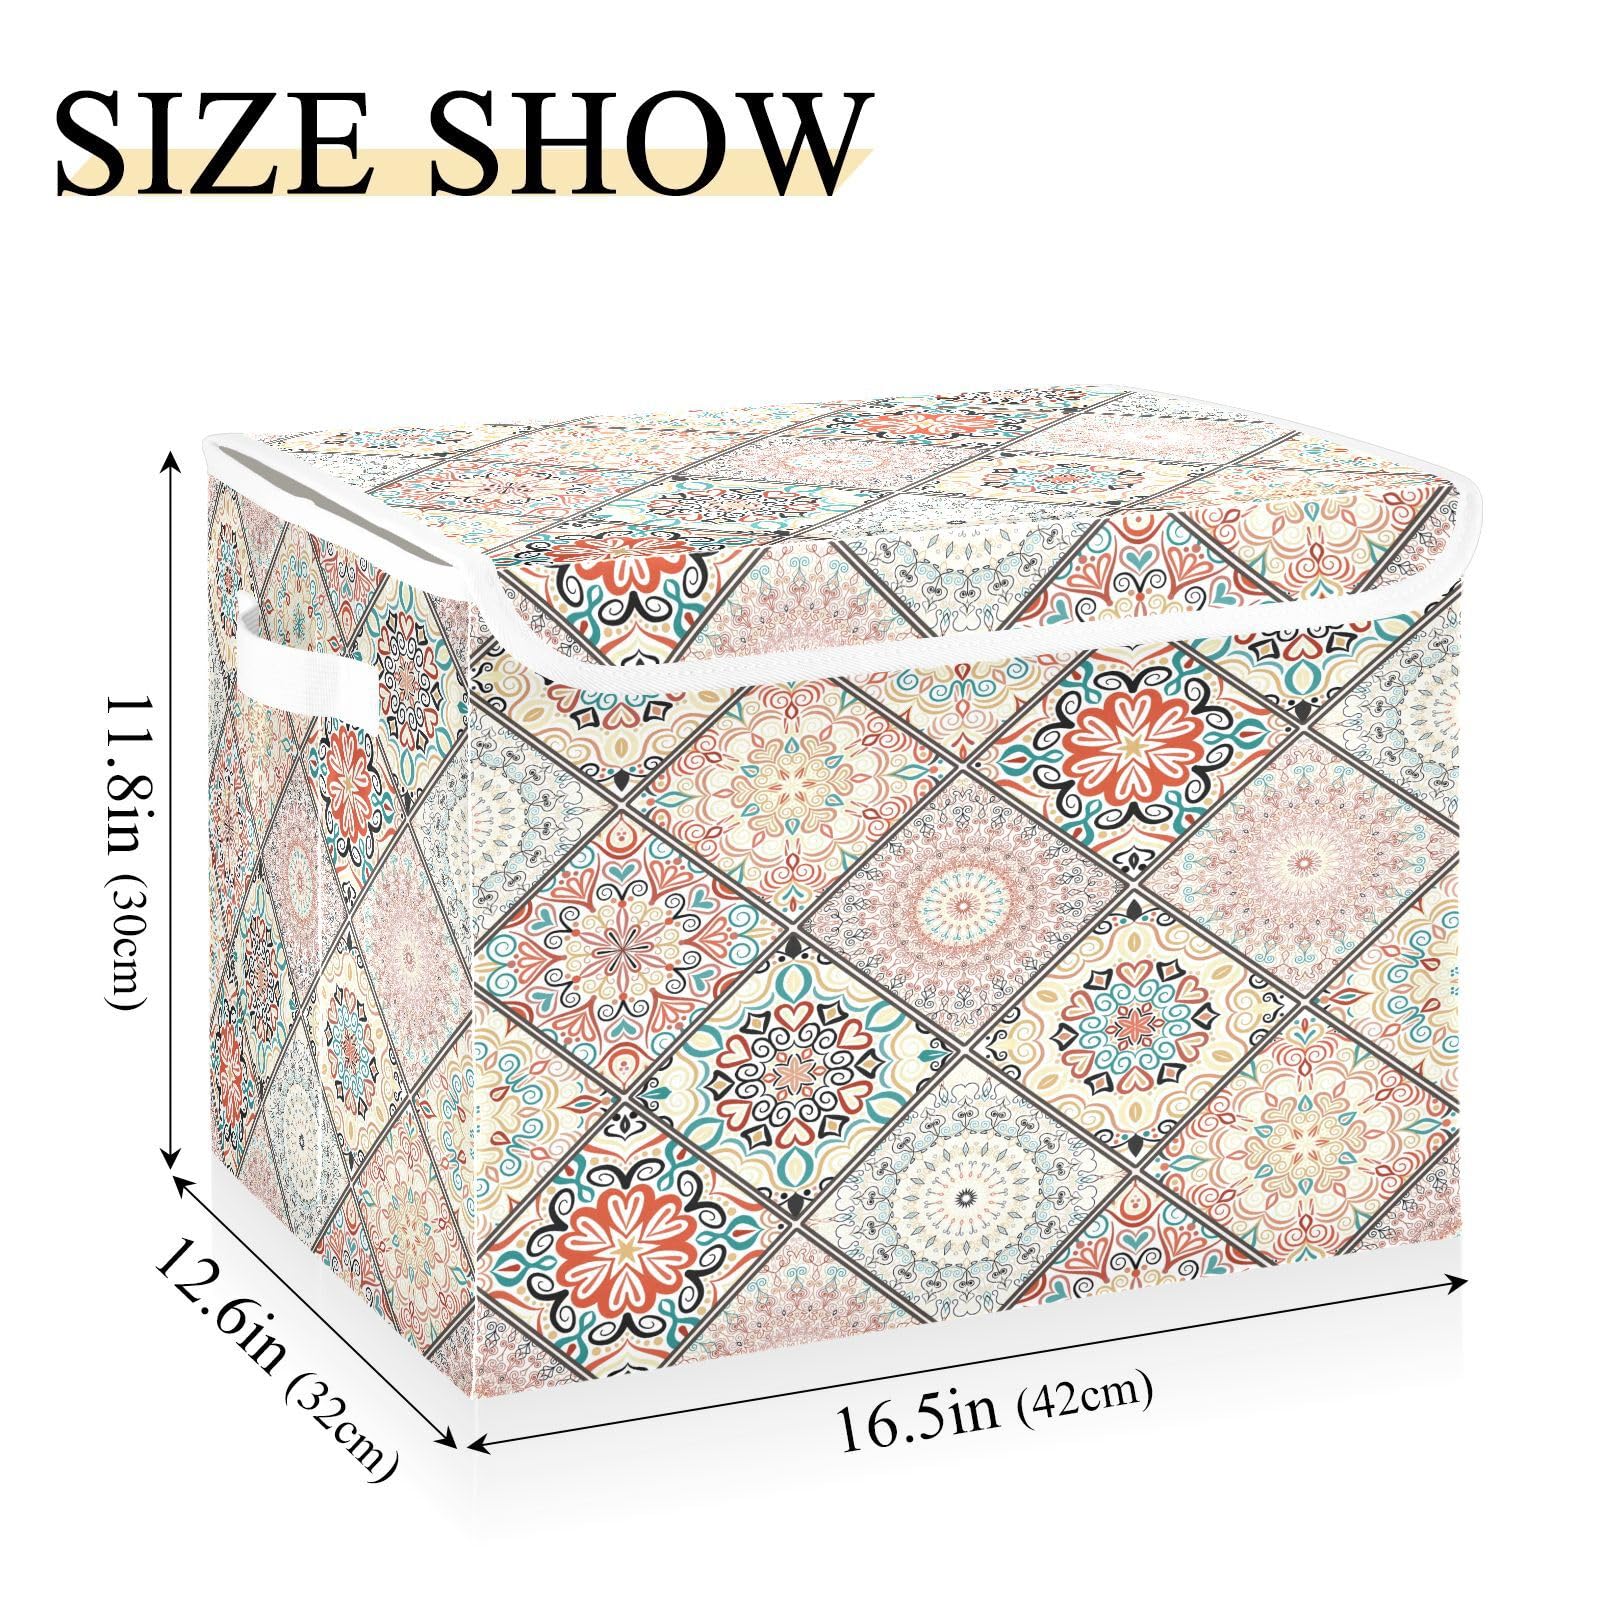 Ollabaky Mexican Mandala Boho Larger Collapsible Storage Bin Fabric Decorative Storage Box Cube Organizer Container Baskets with Lid Handles for Closet Organization, Shelves